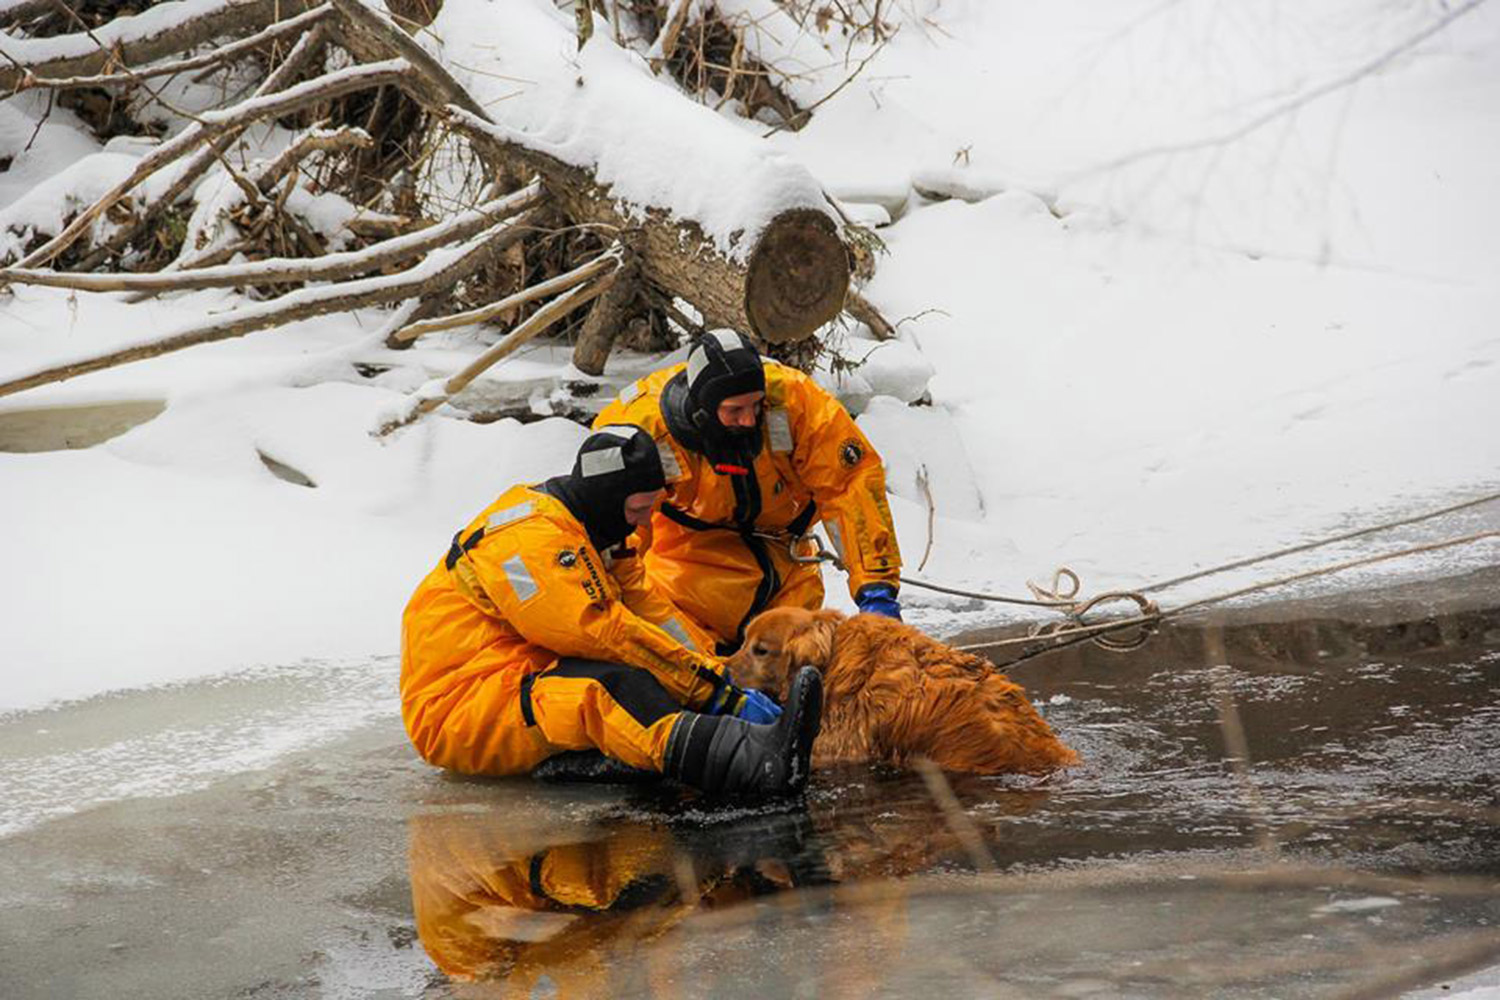 Firefighters Eric Bloom and Dana Curtis rescue Brewer the dog from the frigid Great Works River near Thurrell Road in South Berwick on Wednesday. The dog had been in the water for about an hour before being rescued, according to the department's Facebook page.